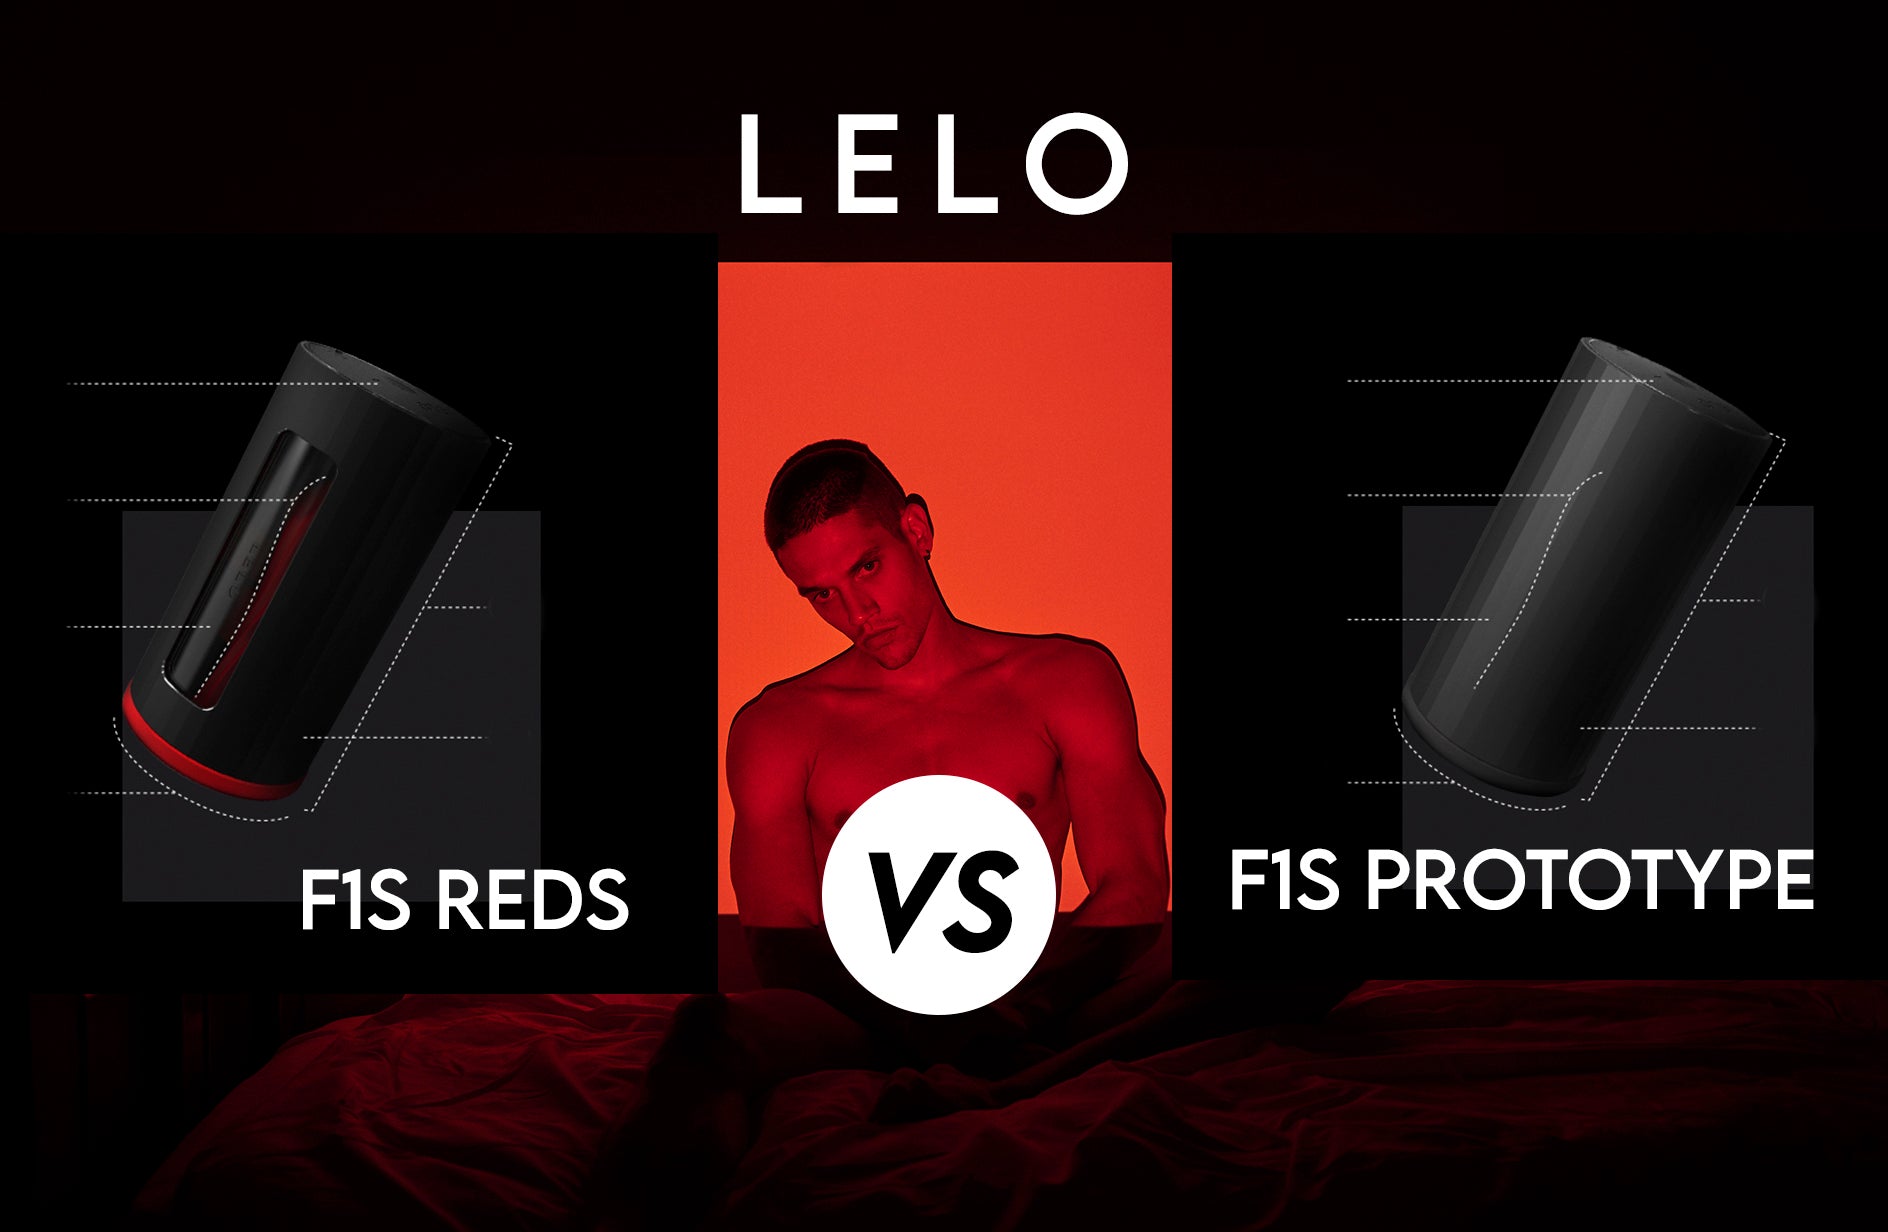 Difference Between LELO's F1s Reds & F1s Prototype